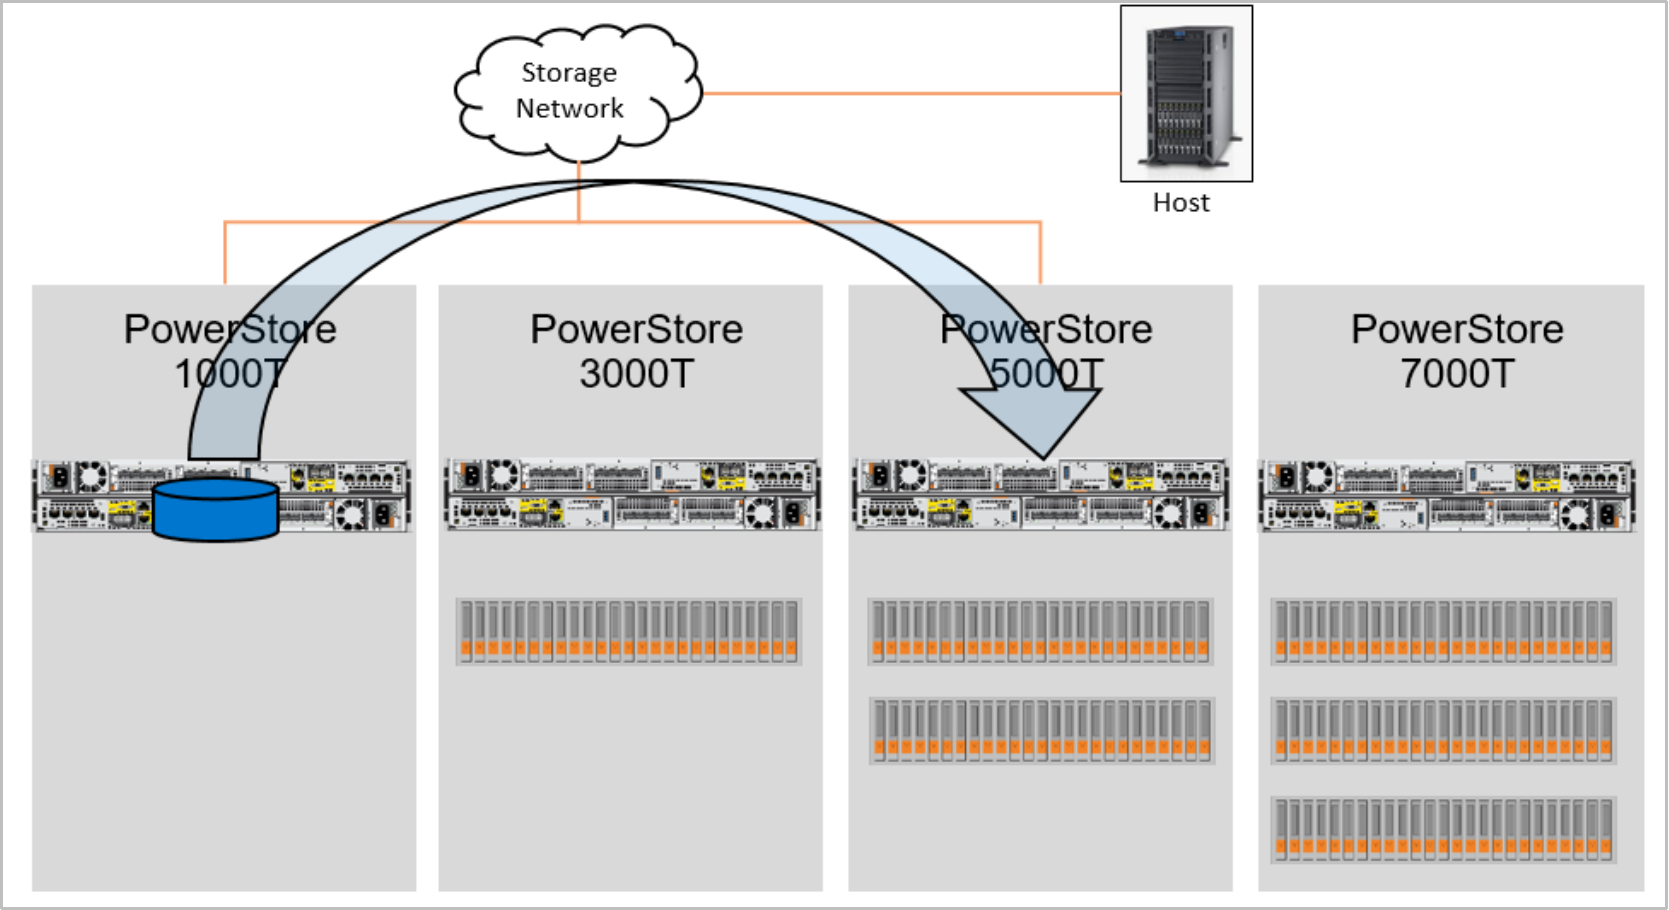 This figure shows a volume migration example for a PowerStore cluster.